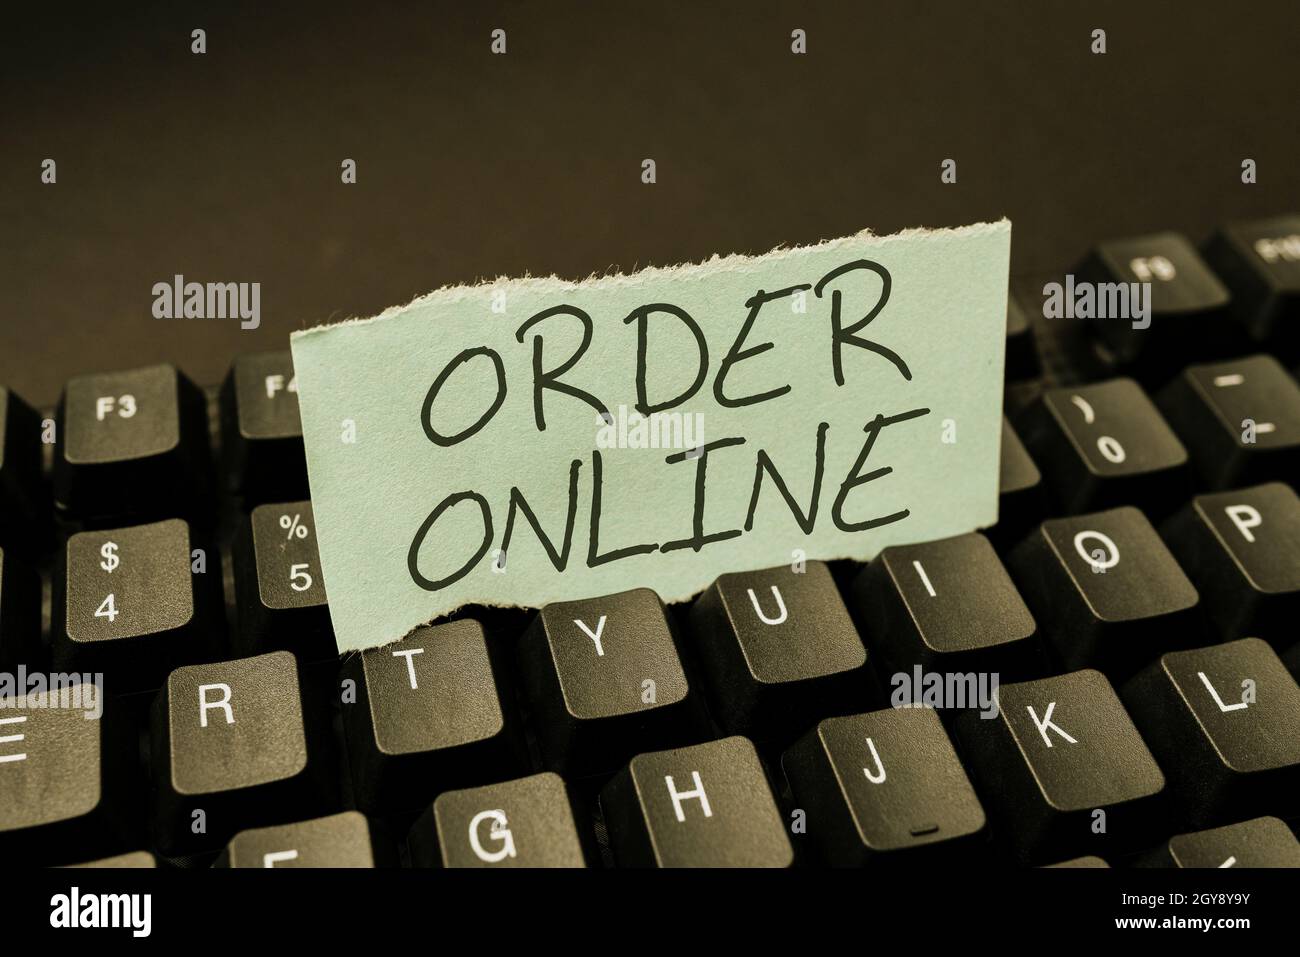 Writing displaying text Order Online, Word for Buying goods and services from the sellers over the internet Creating Online Journals, Typing New Artic Stock Photo